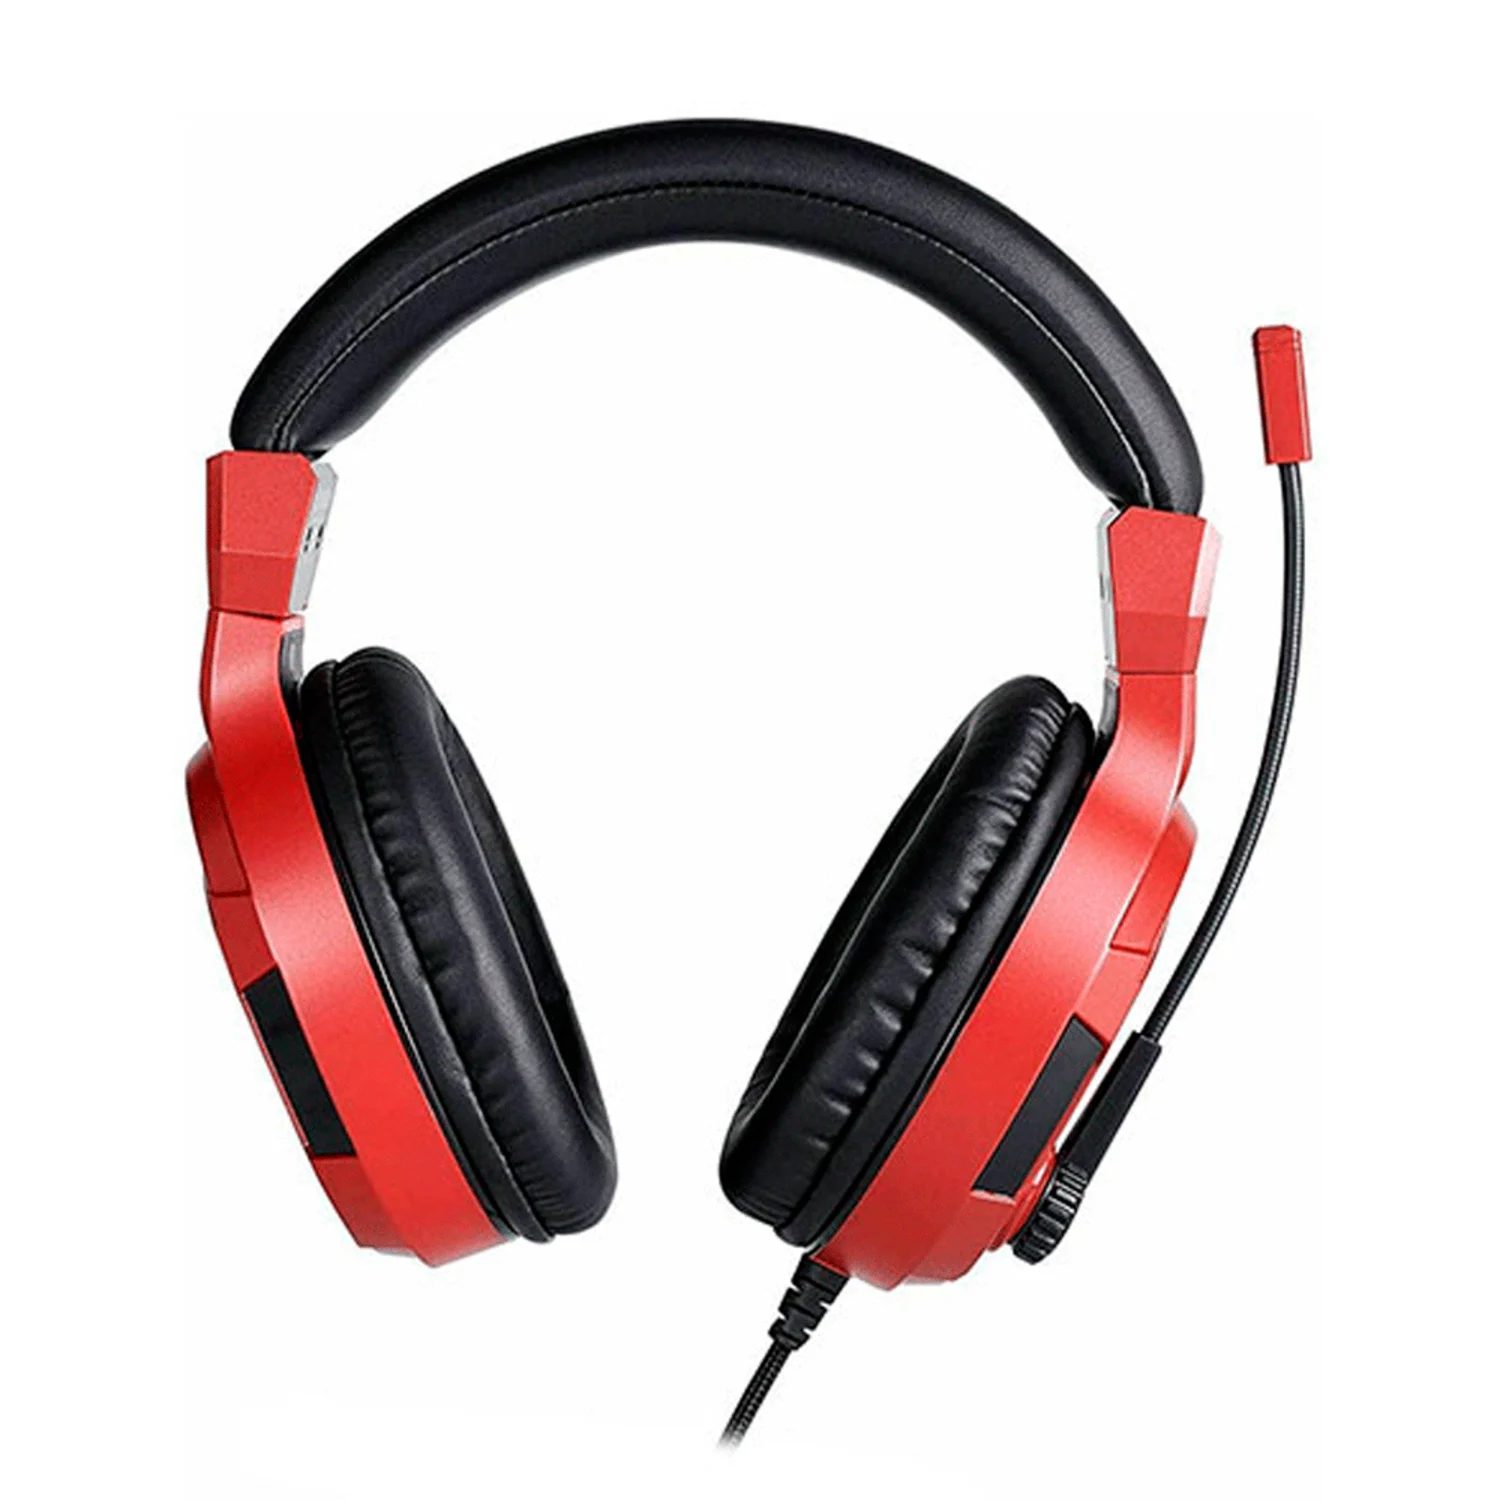 Headset Stereo Gaming Big Ben V3 Wired para PS4 - Red